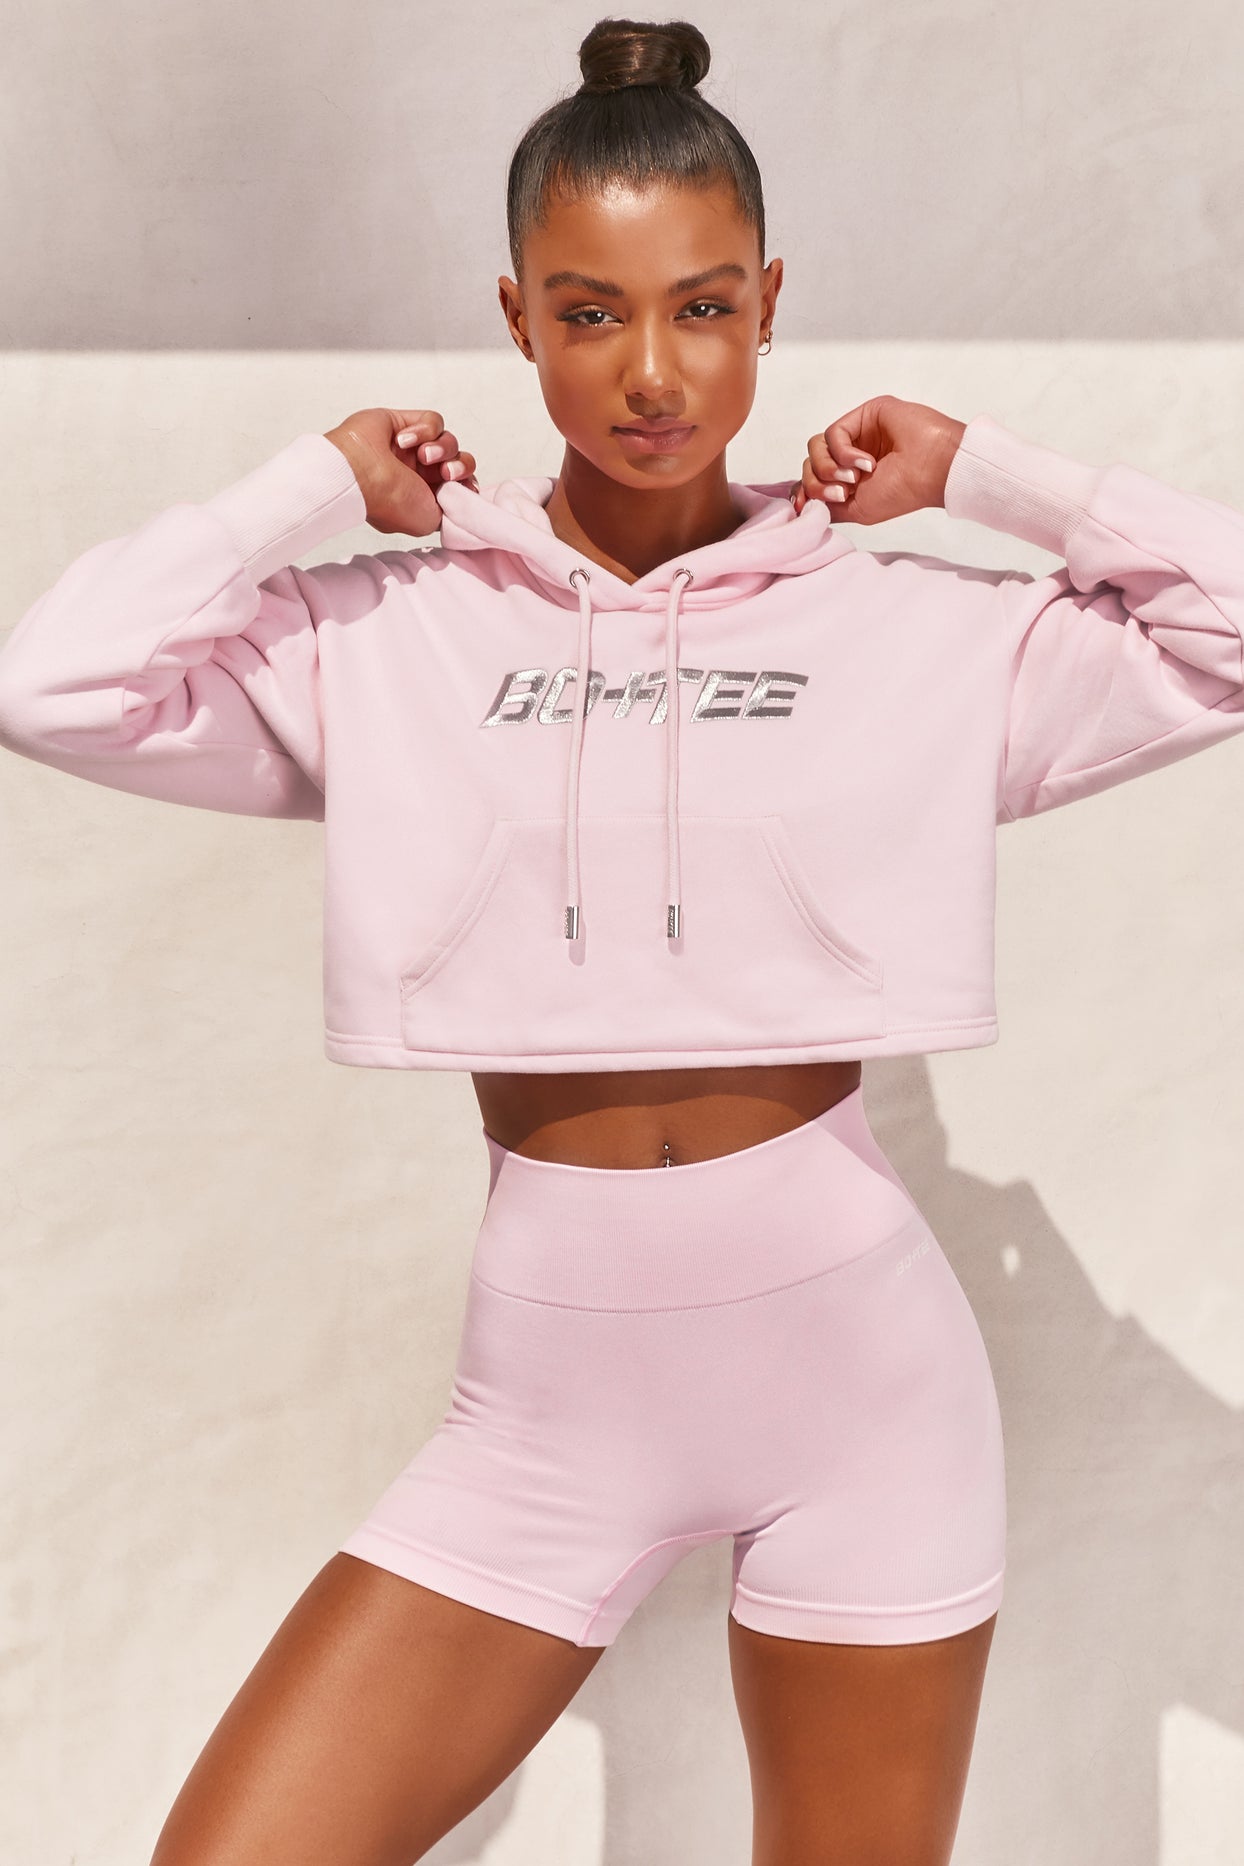 Off Duty Cropped Hoodie in Light Pink